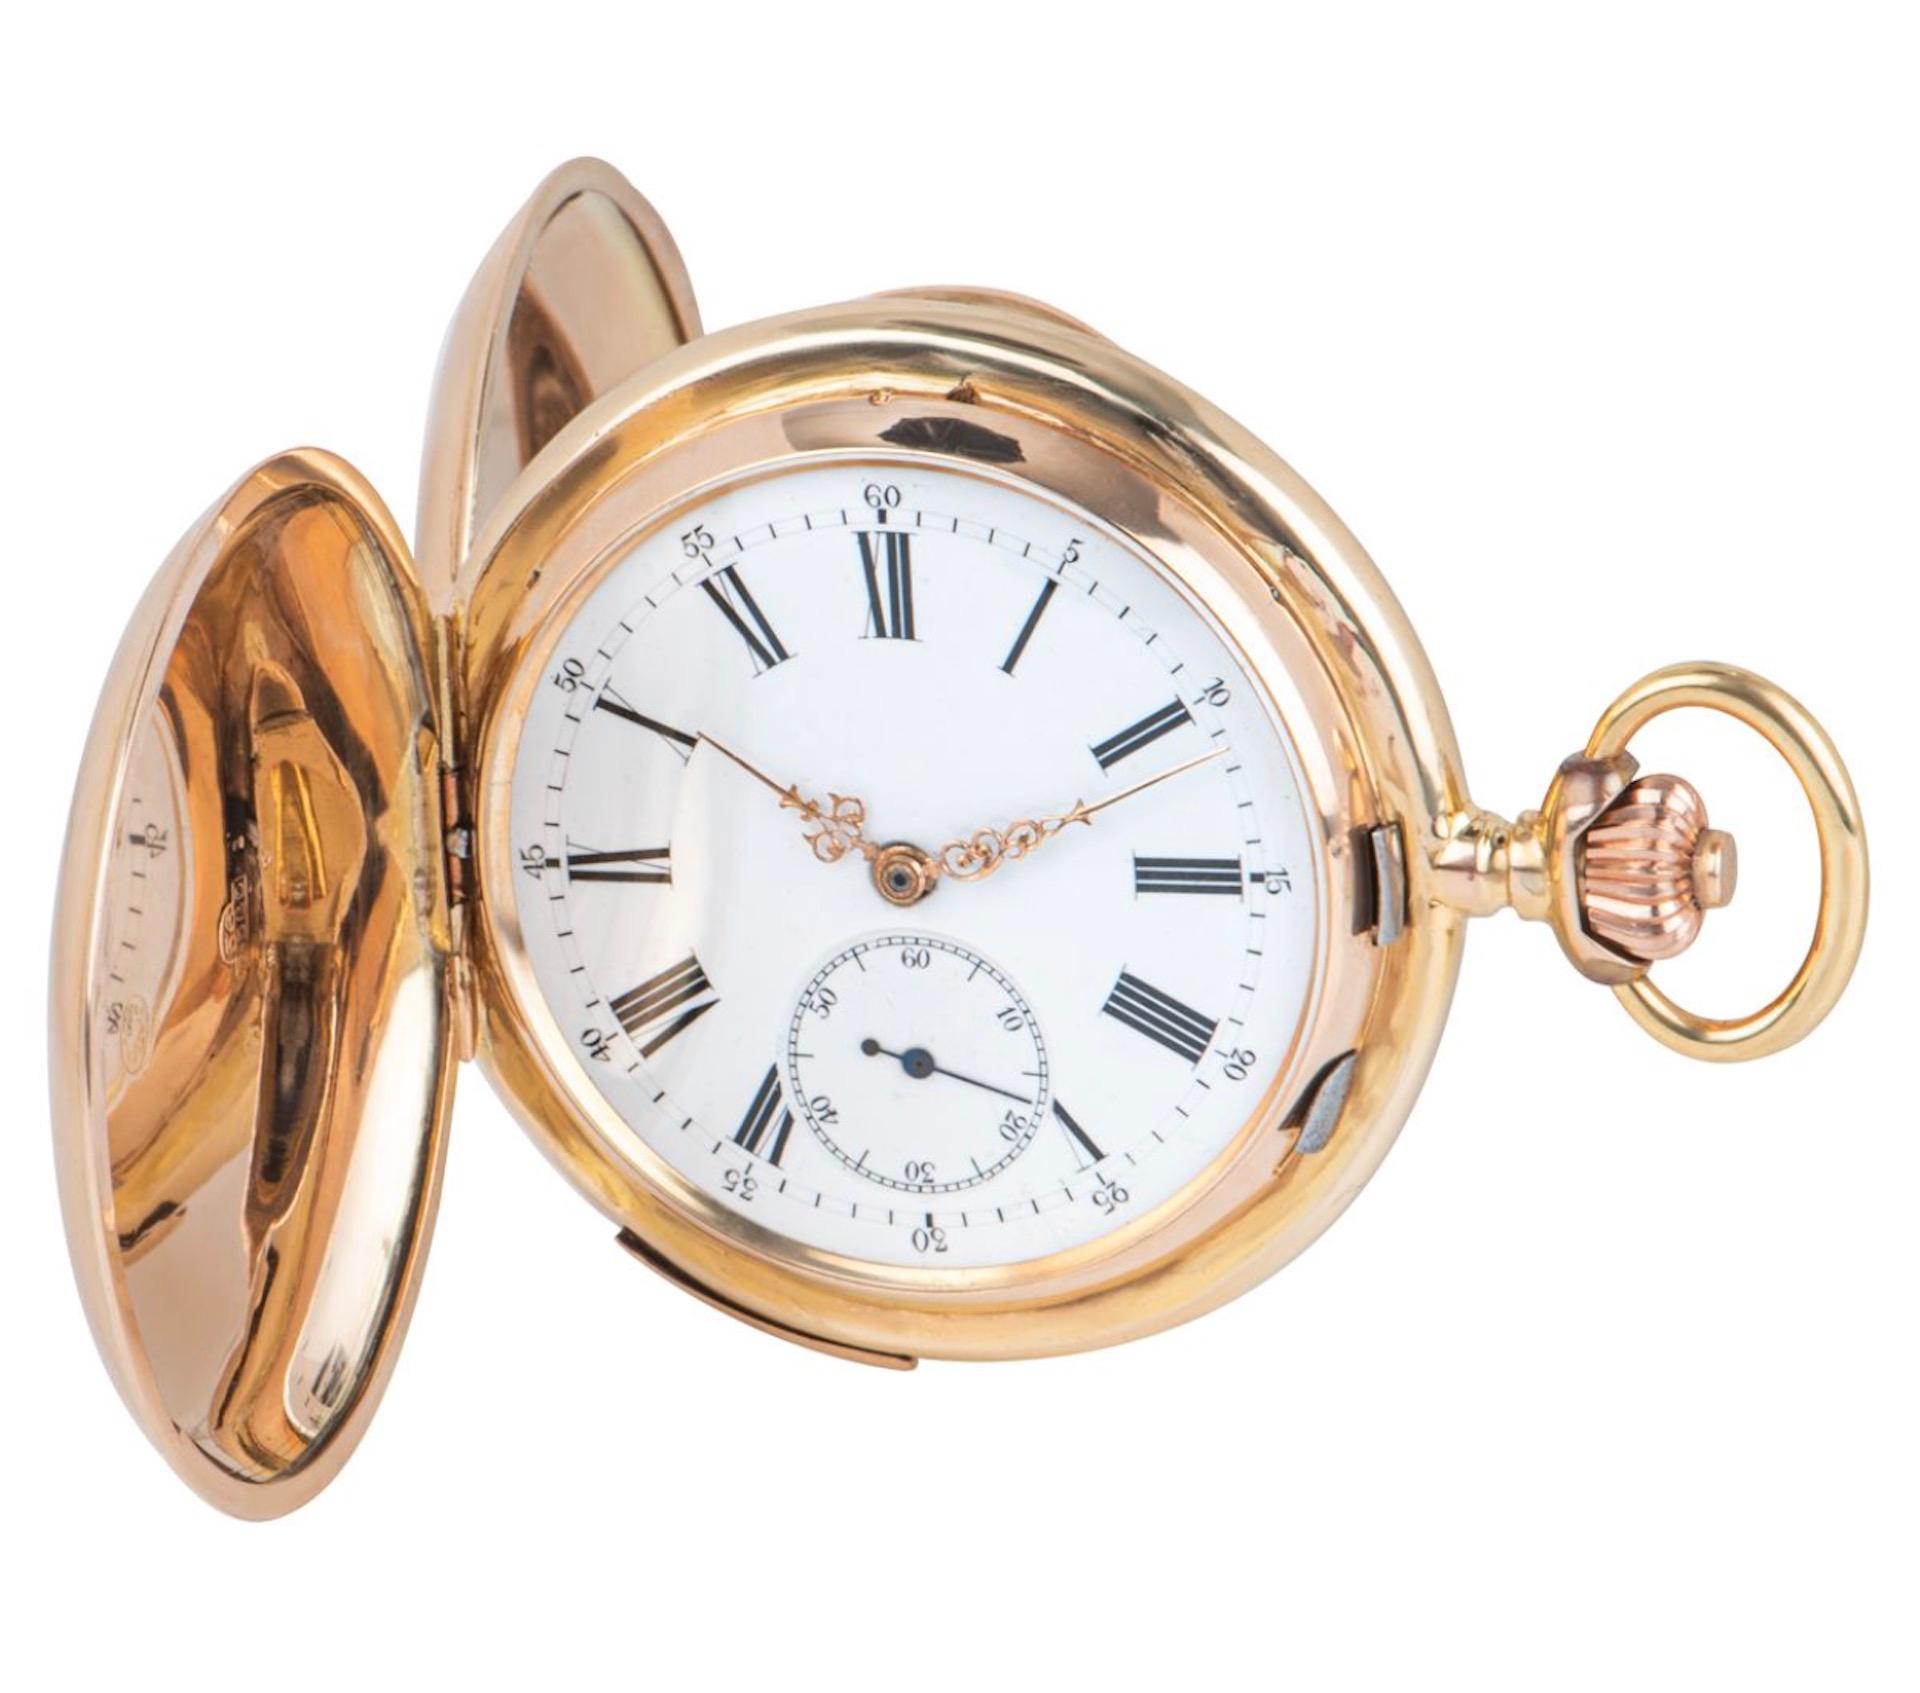 A 14ct Rose Gold Erotic Automaton Swiss Full Hunter Quarter Repeater Keyless Lever Pocket Watch C1900s.

Dial: A white enamel dial with Roman Numerals outer minute track with Arabic minute markers at five minute intervals, a sub second dial at six